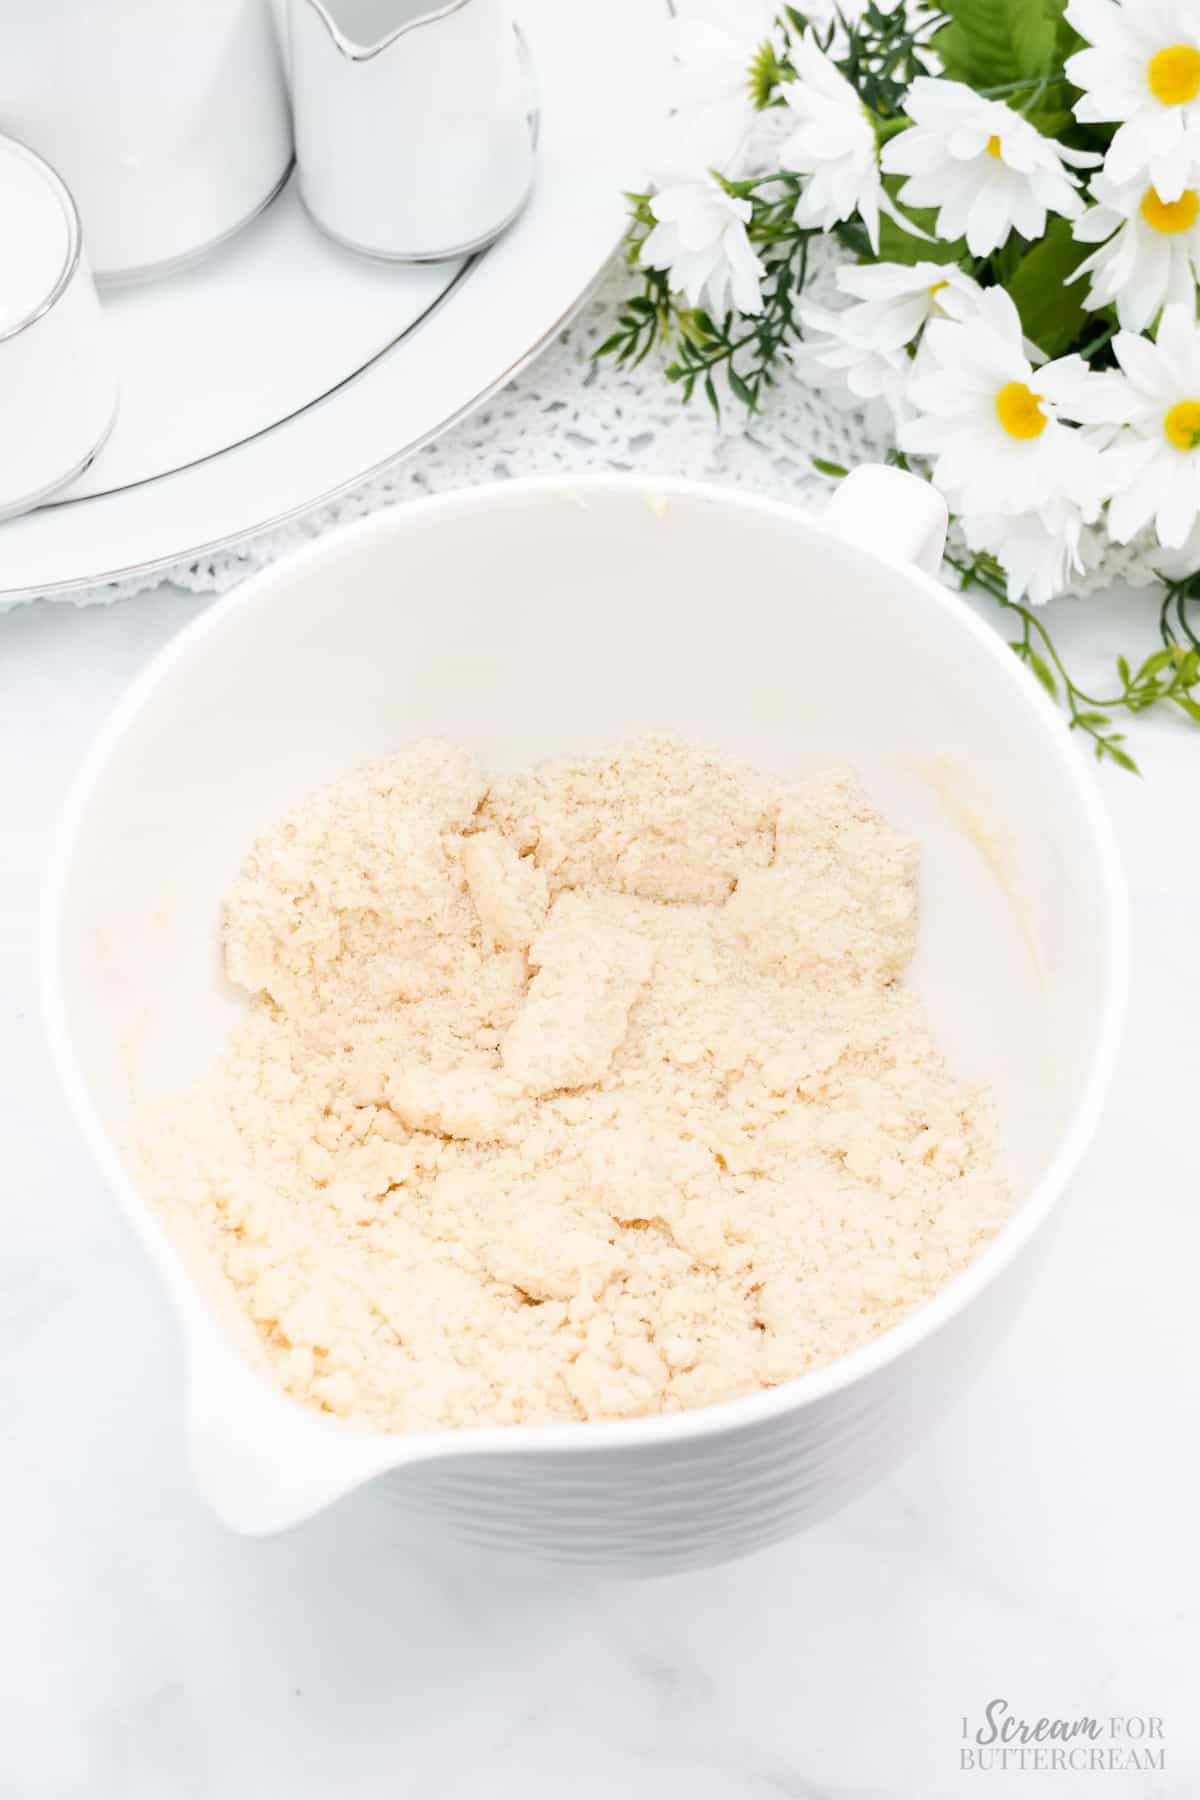 Butter mixed with dry ingredients in a white bowl.